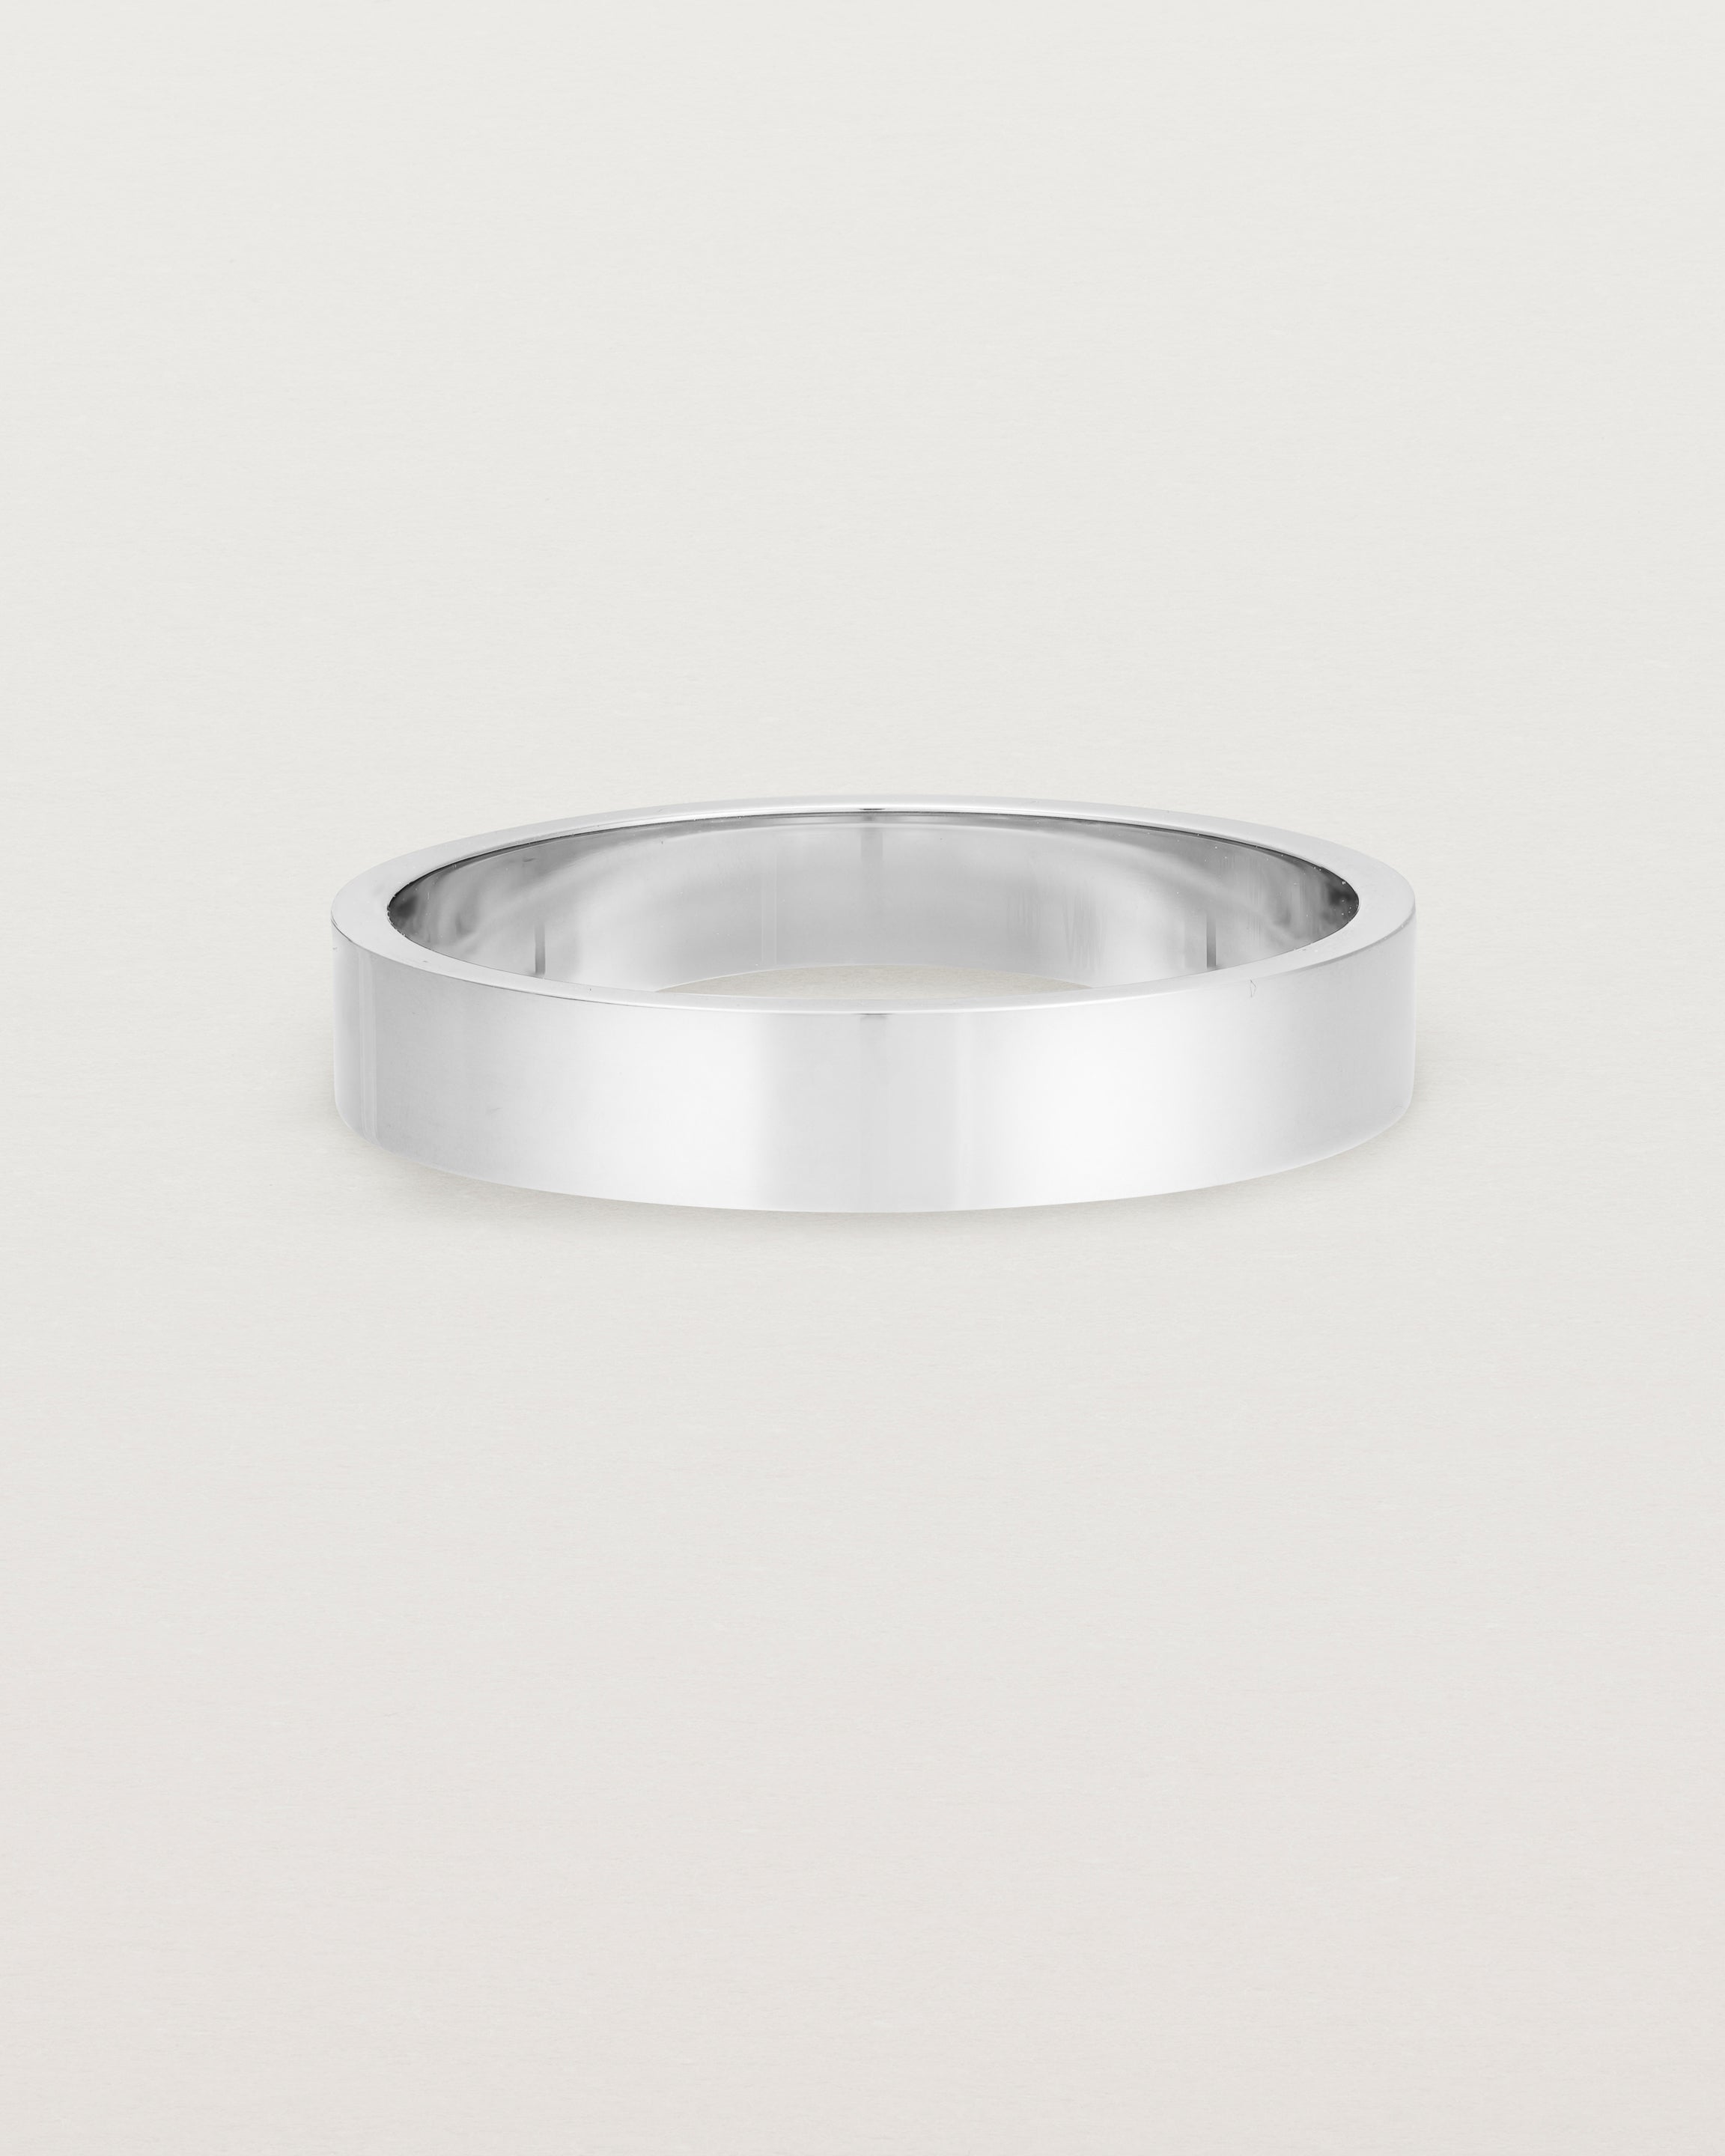 Our square, flat 4mm profile wedding band crafted in sterling silver